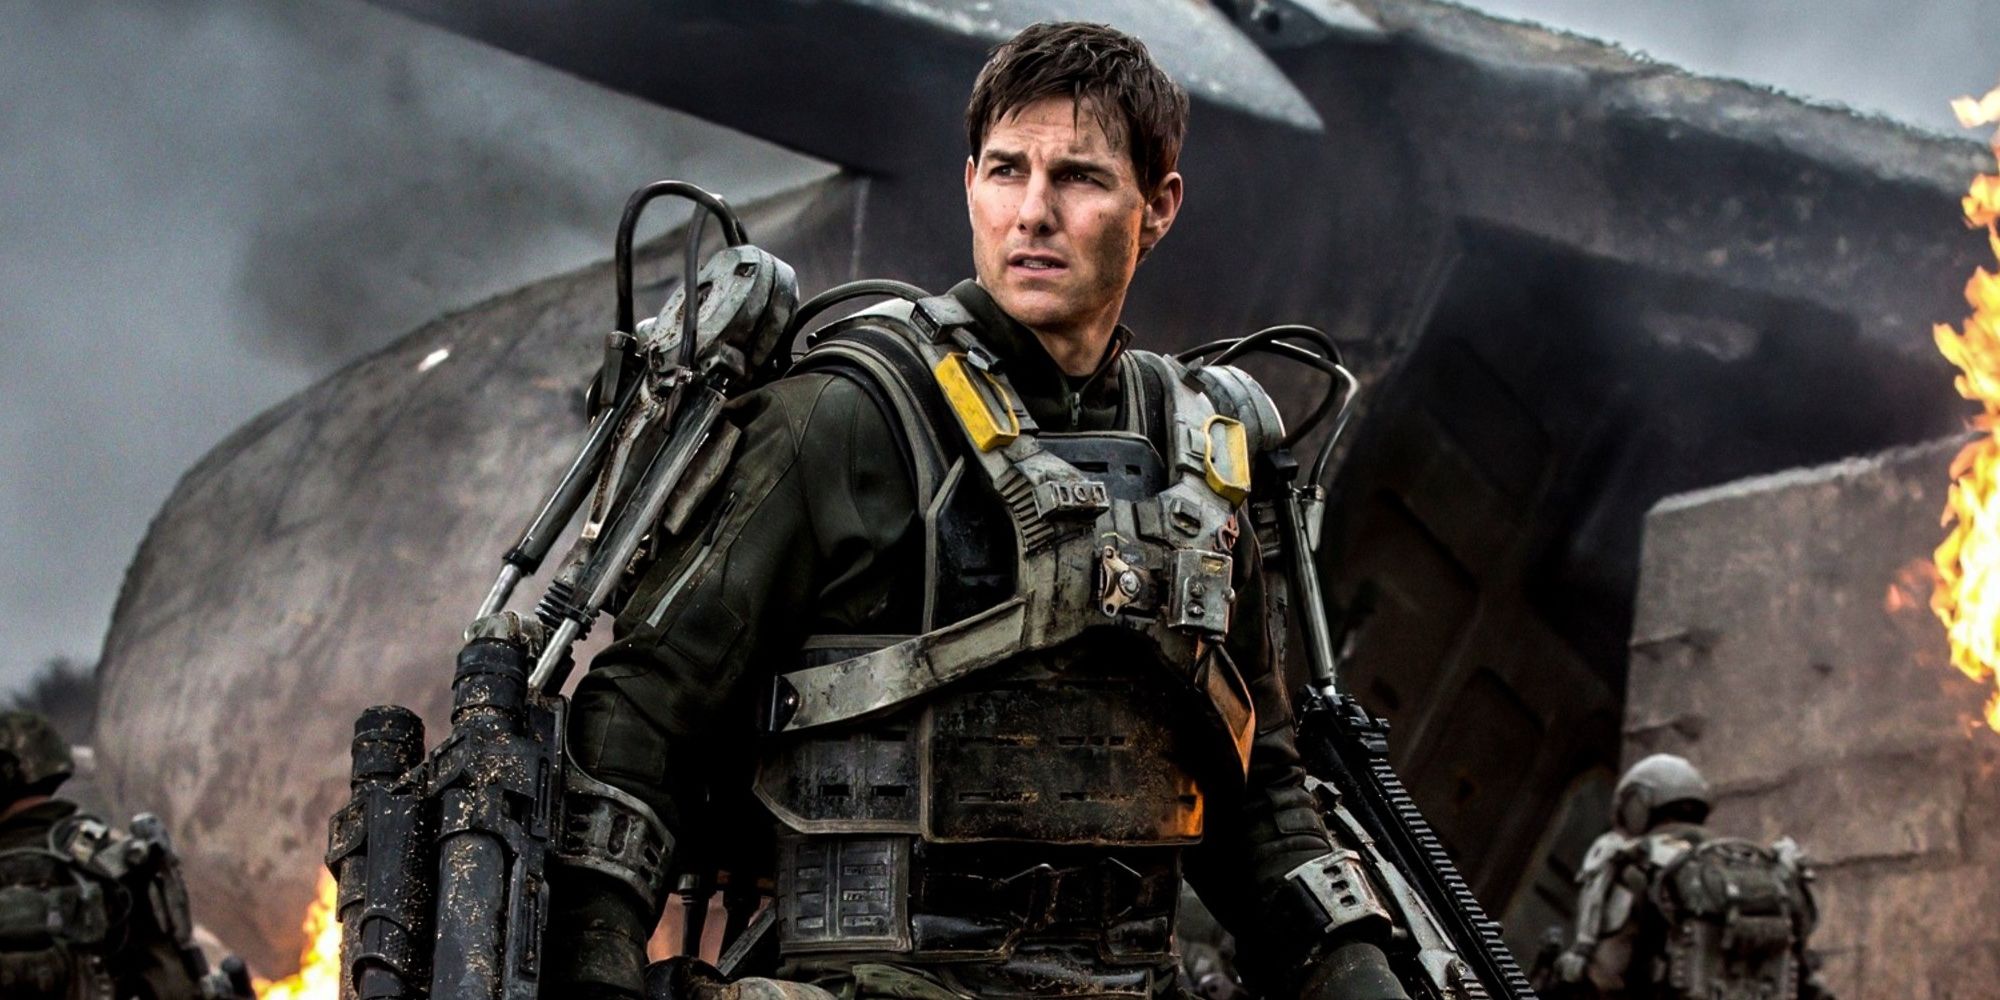 tom cruise movie about the future